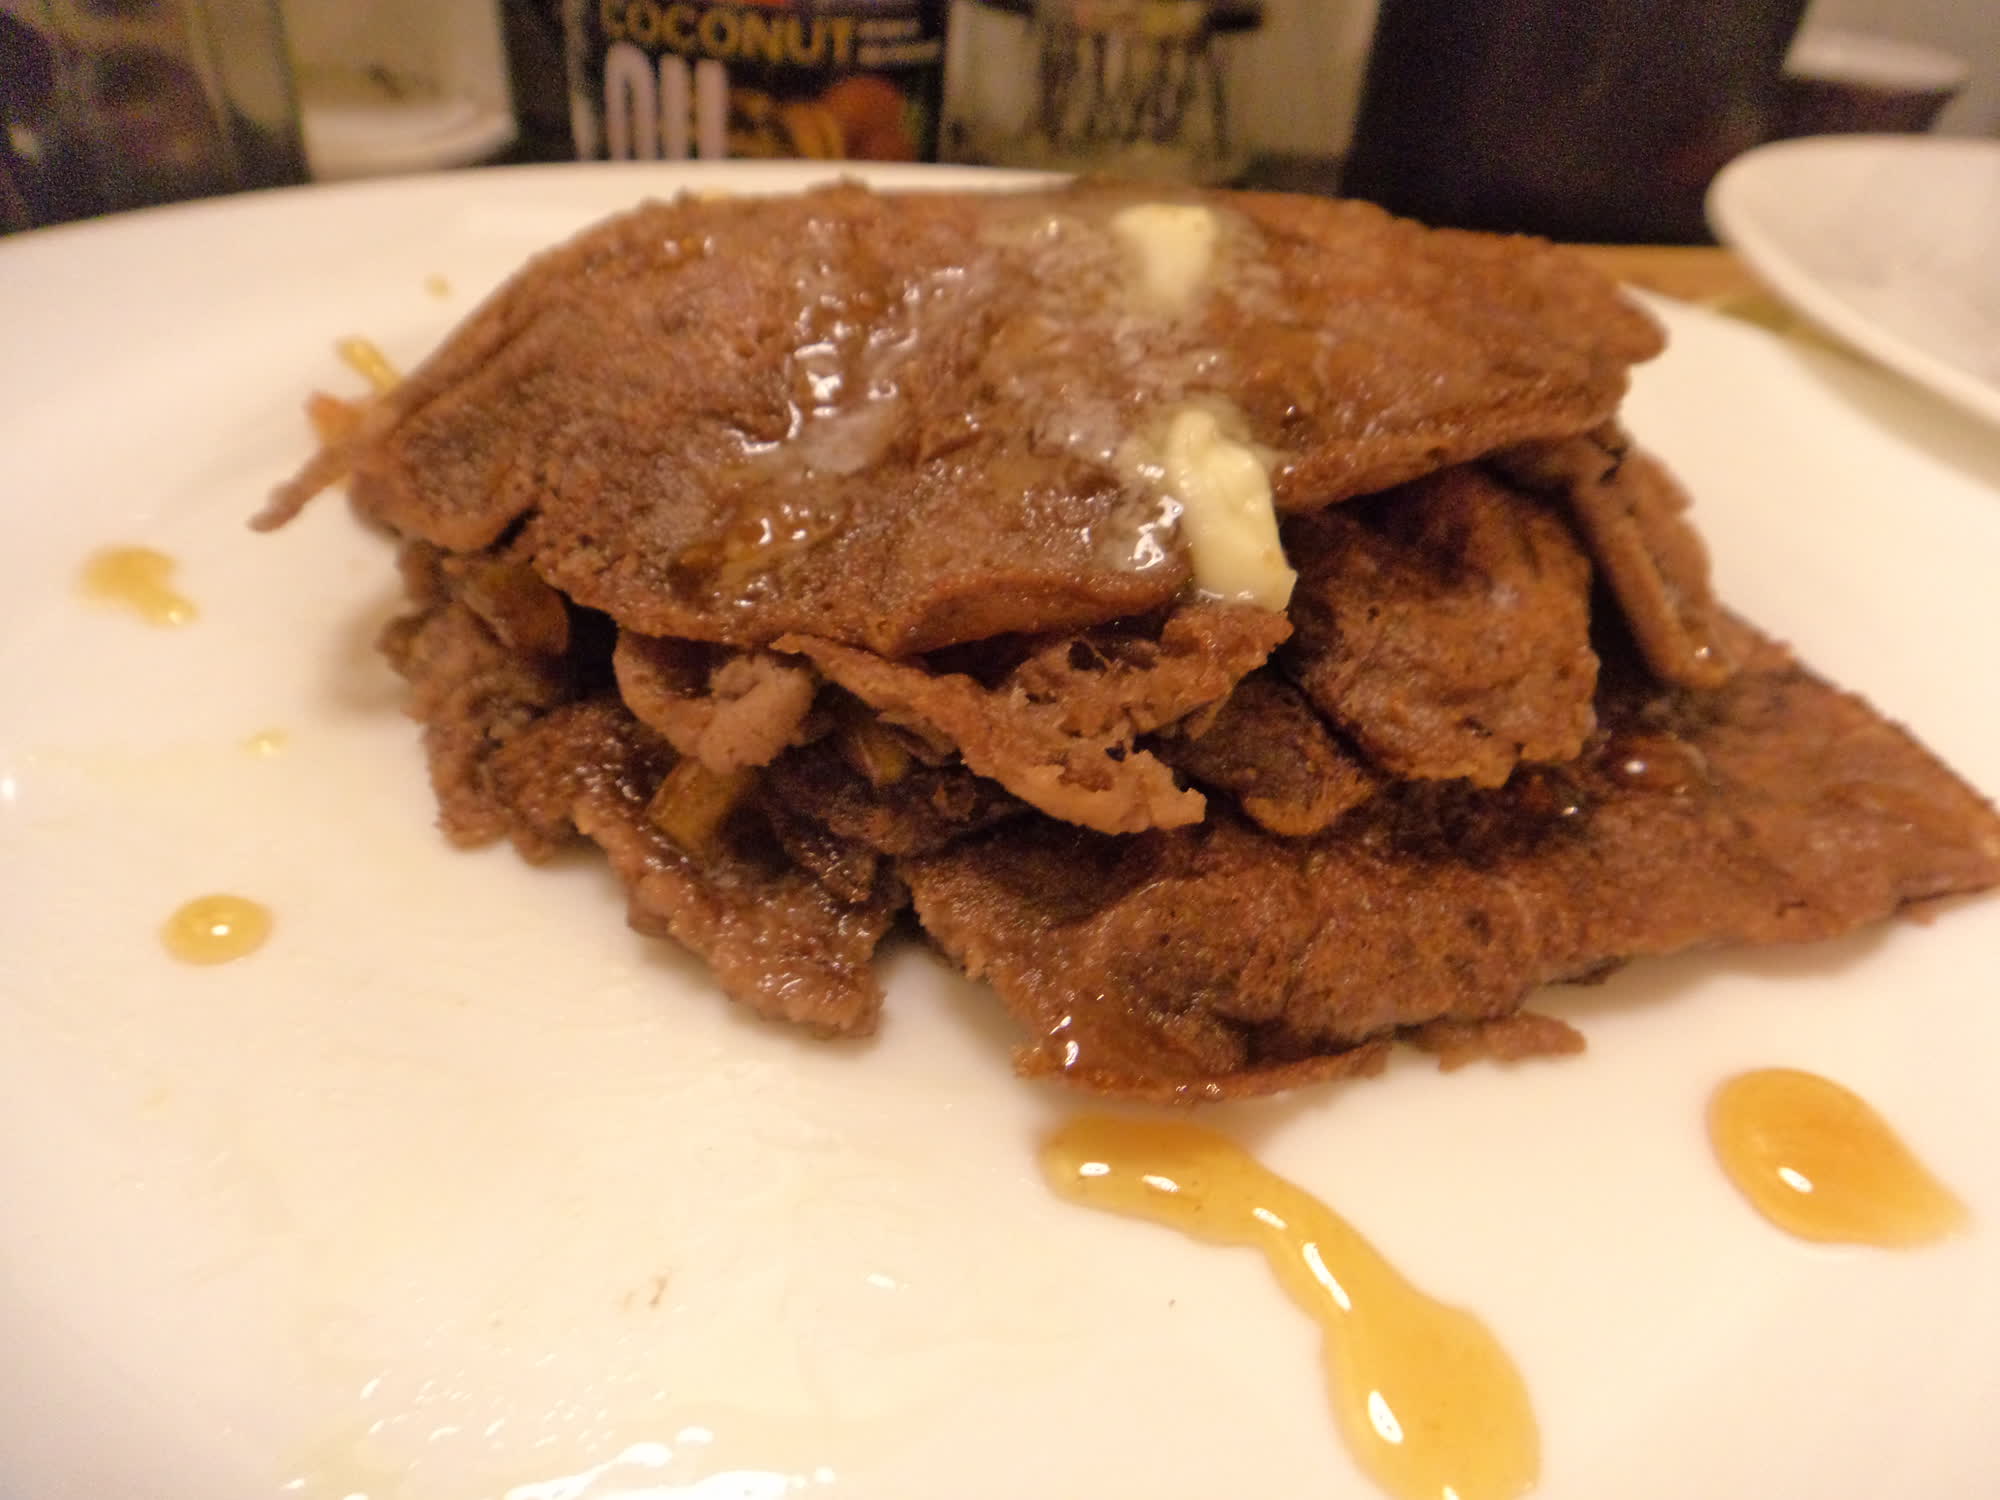 Chocolate flatcakes with butter and orange sauce.